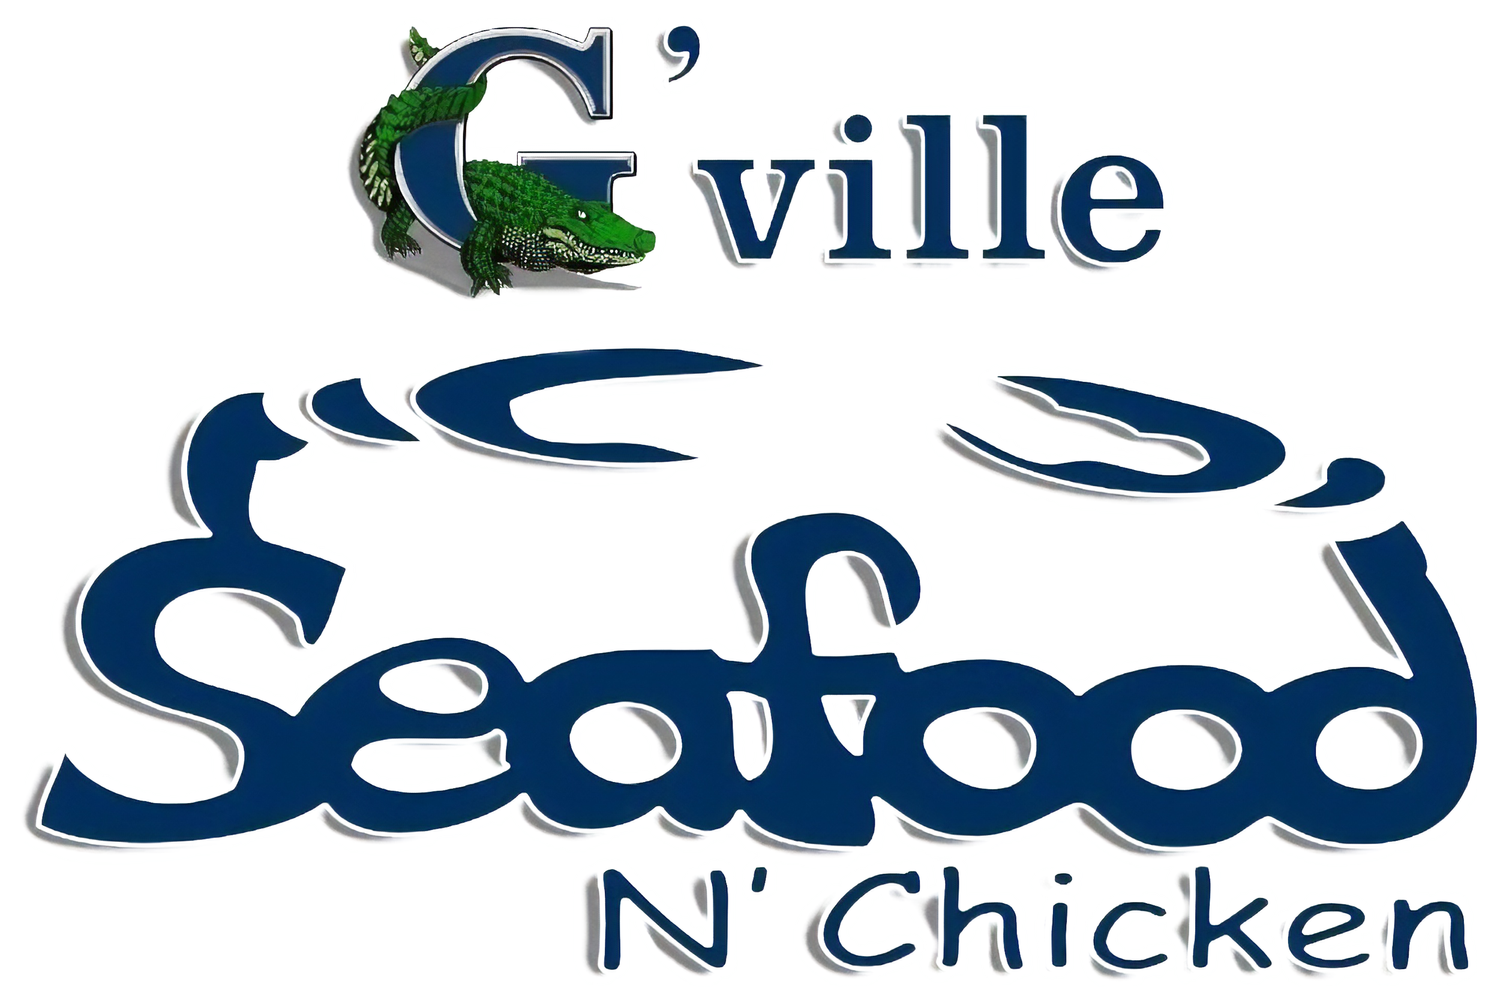 Gville Seafood &amp; Chicken